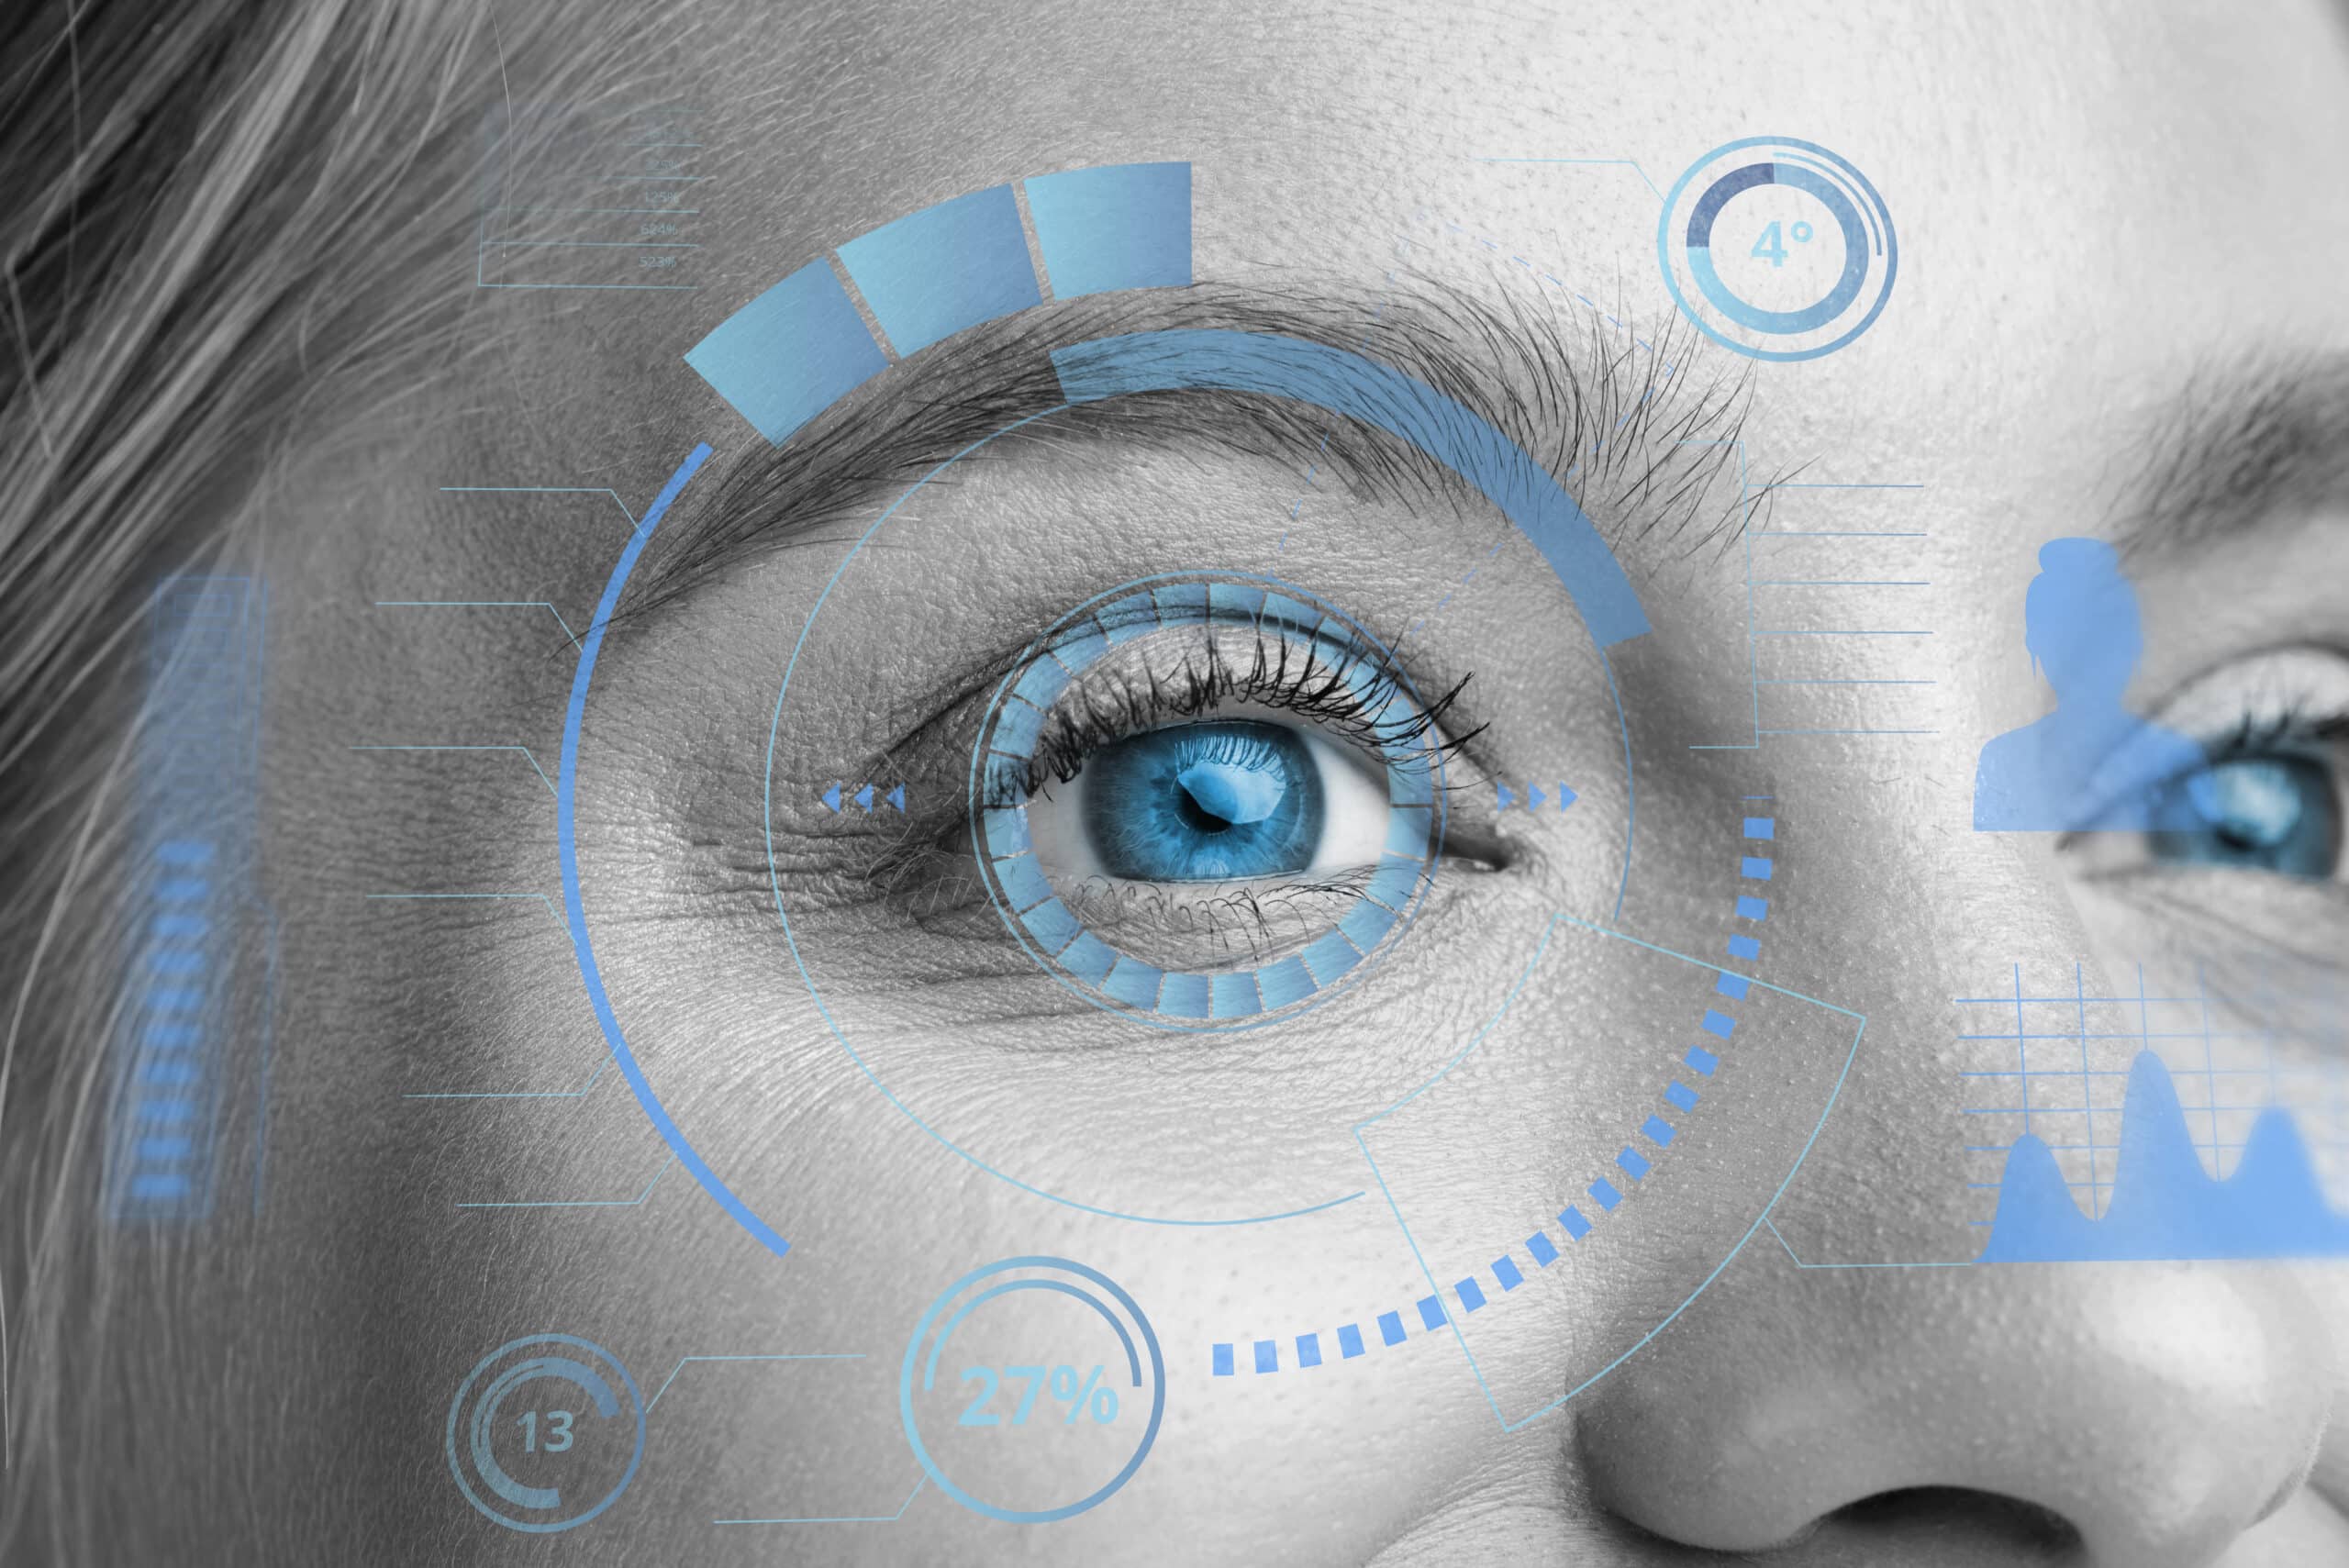 Advanced Facial Recognition for Secure Identity Verification Solutions